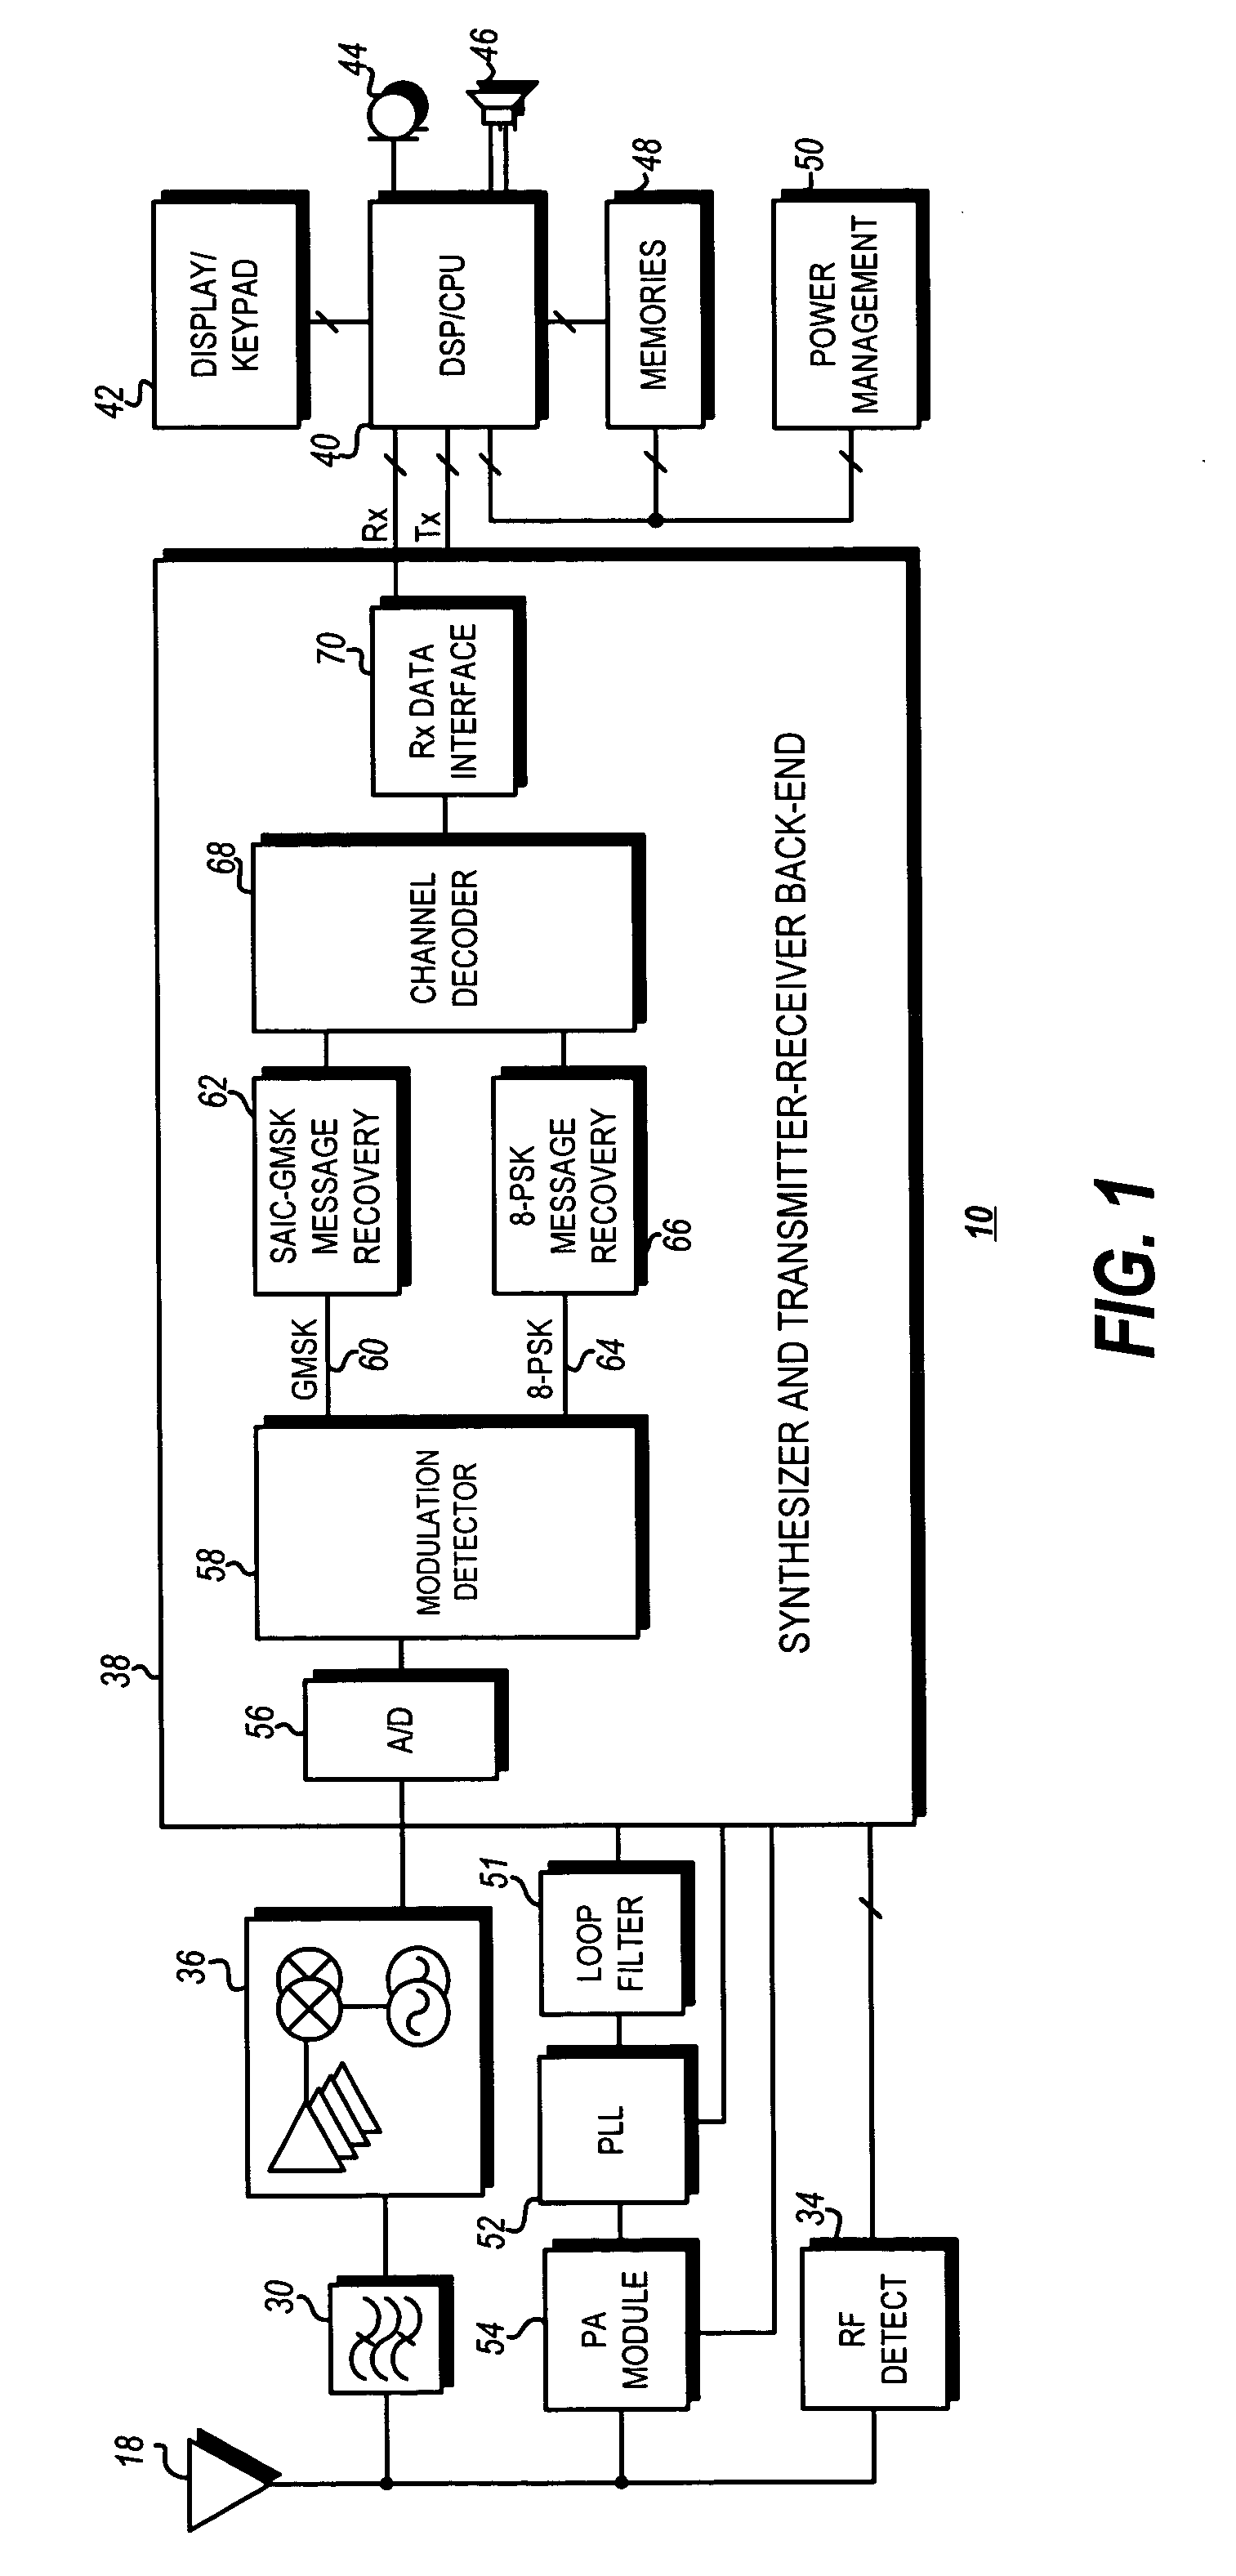 Modulation detection in a saic operational environment